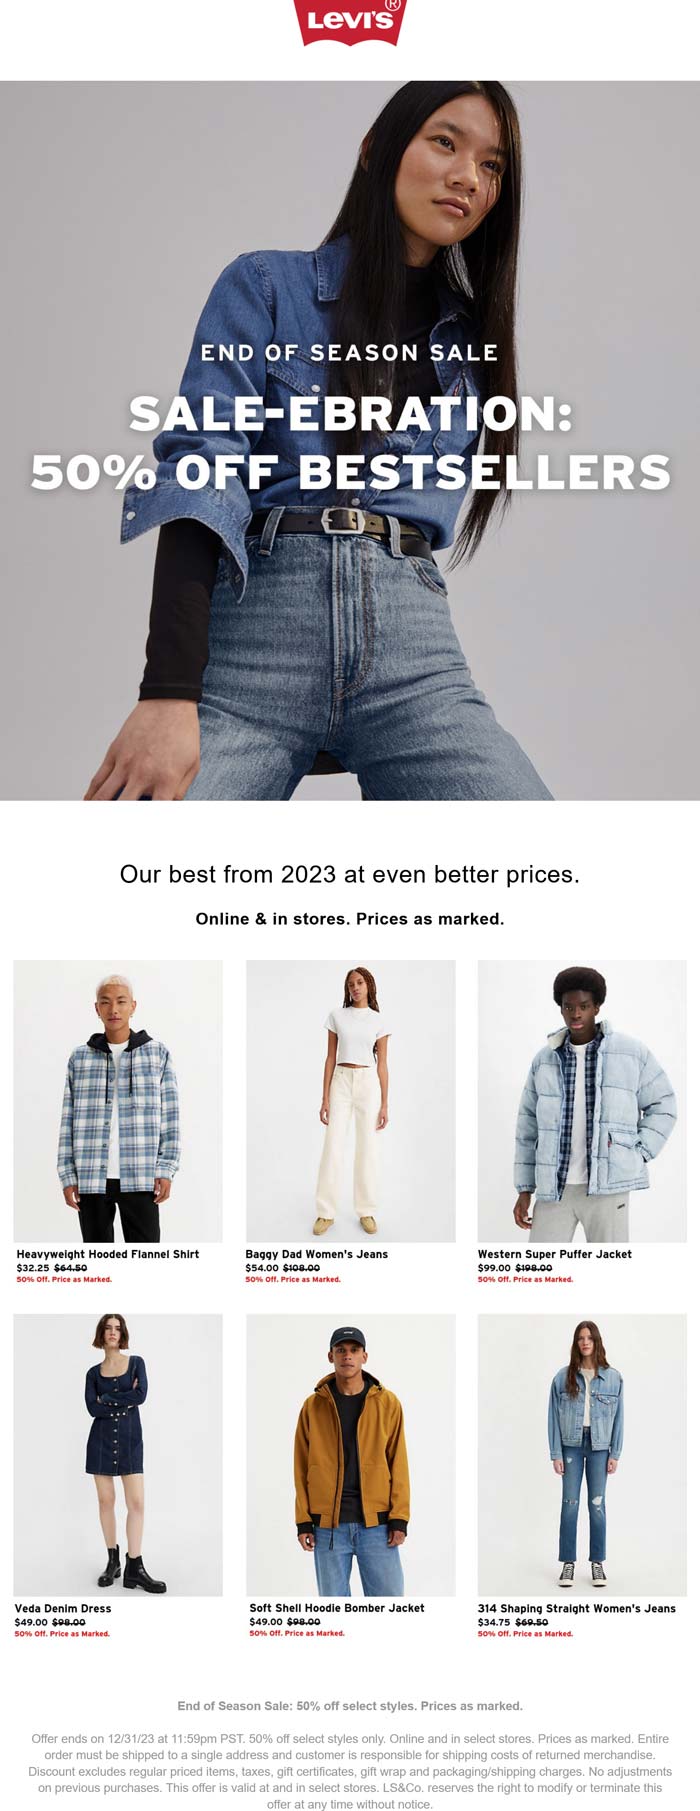 Levis stores Coupon  50% off bestsellers at Levis, ditto online #levis 